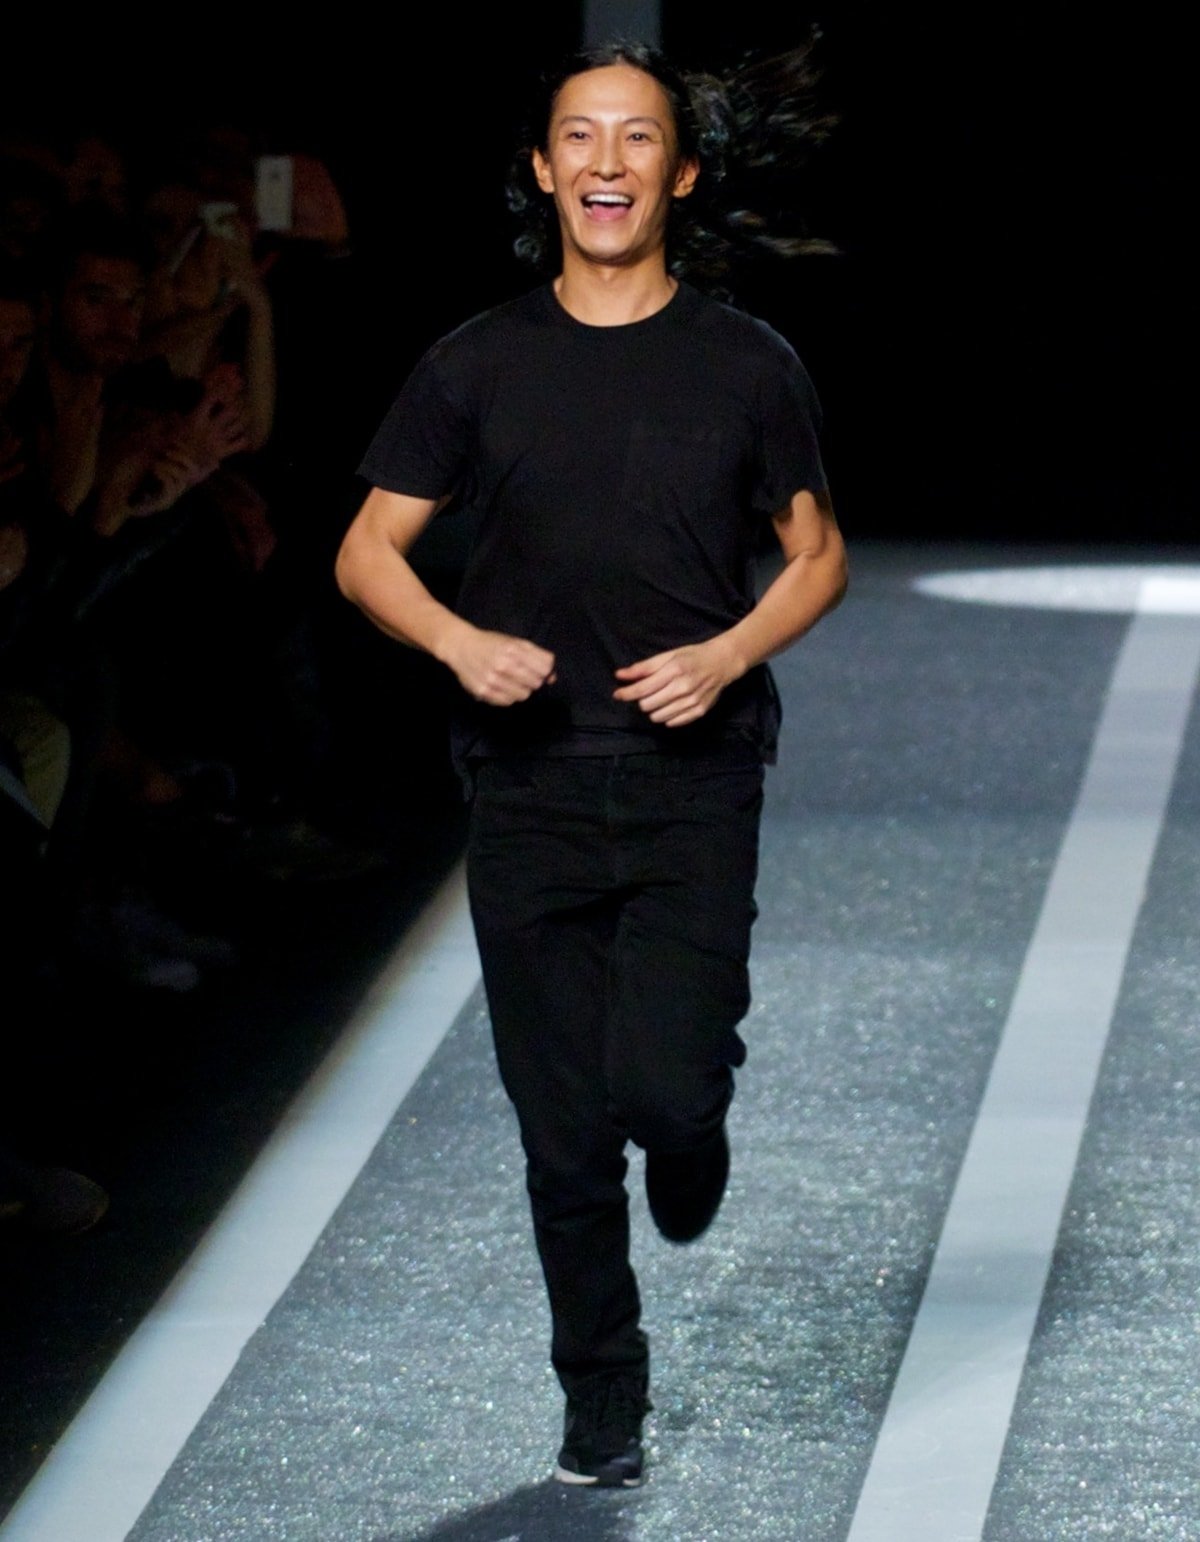 Fashion designer Alexander Wang looking excited on the runway at the Alexander Wang x H&M Collection Launch